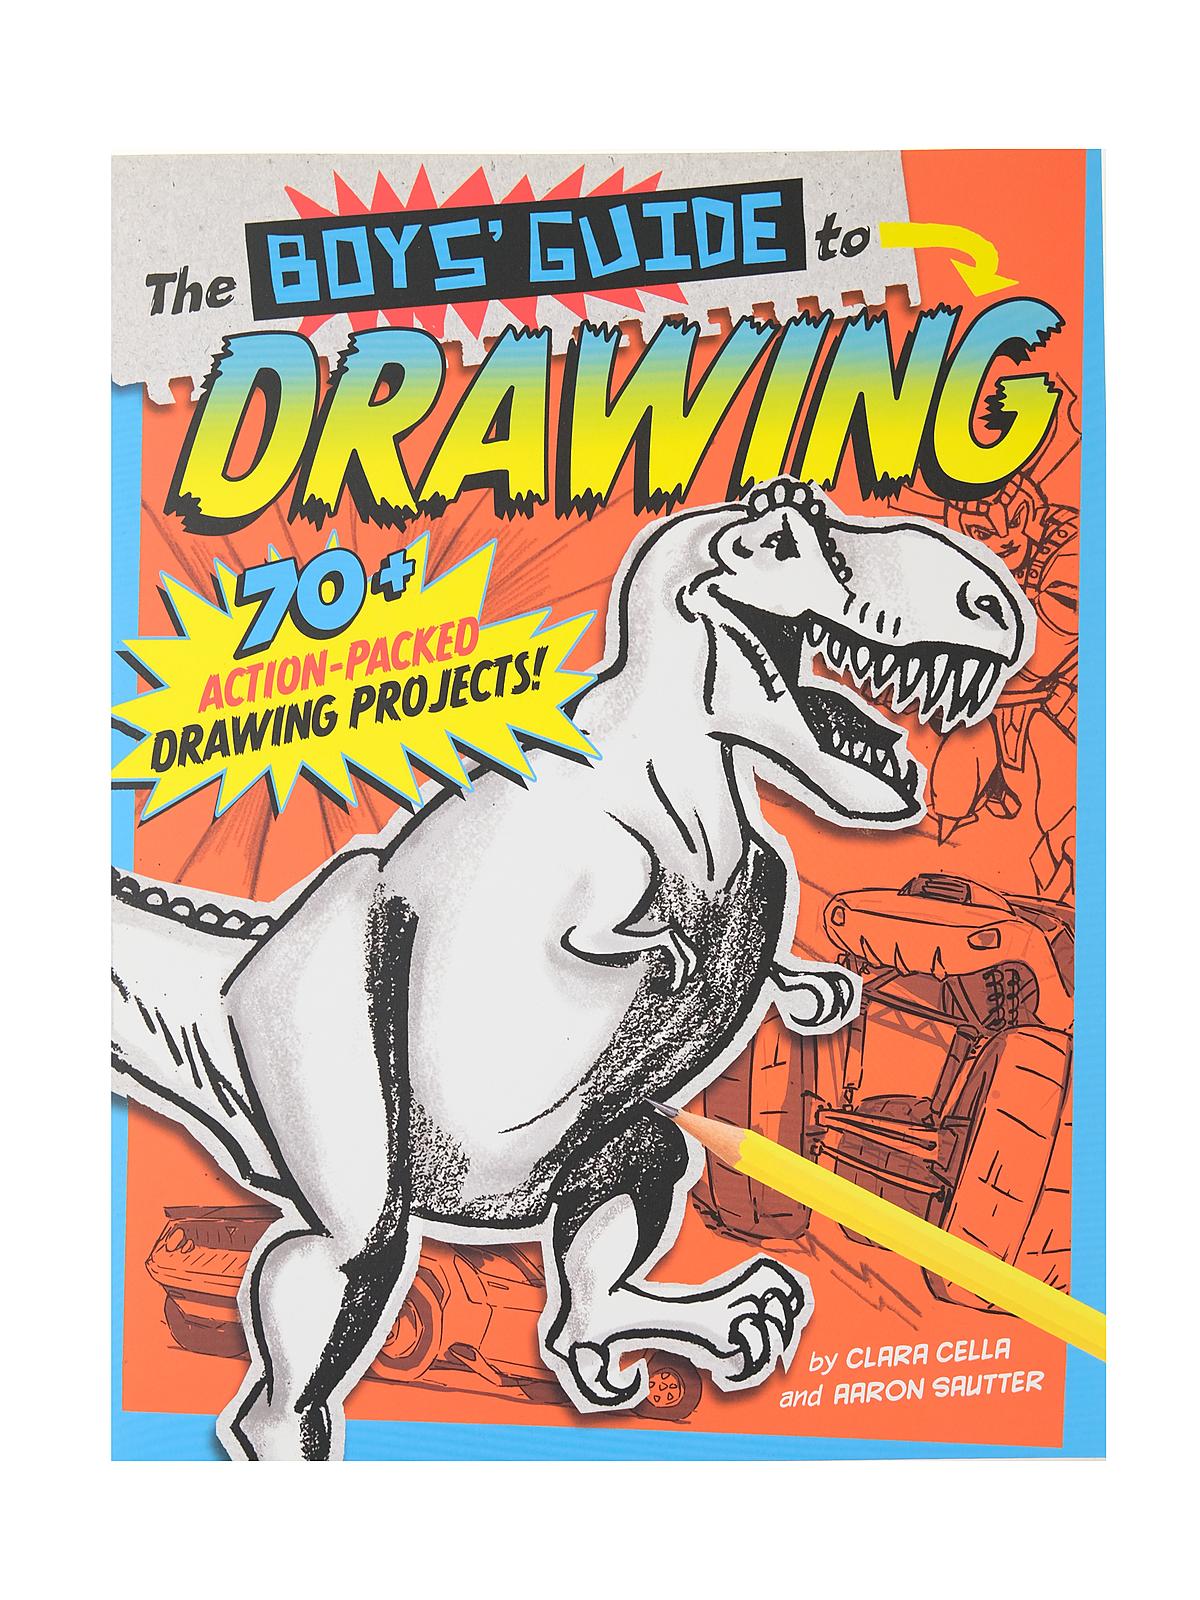 Boys' Guide To Drawing Each